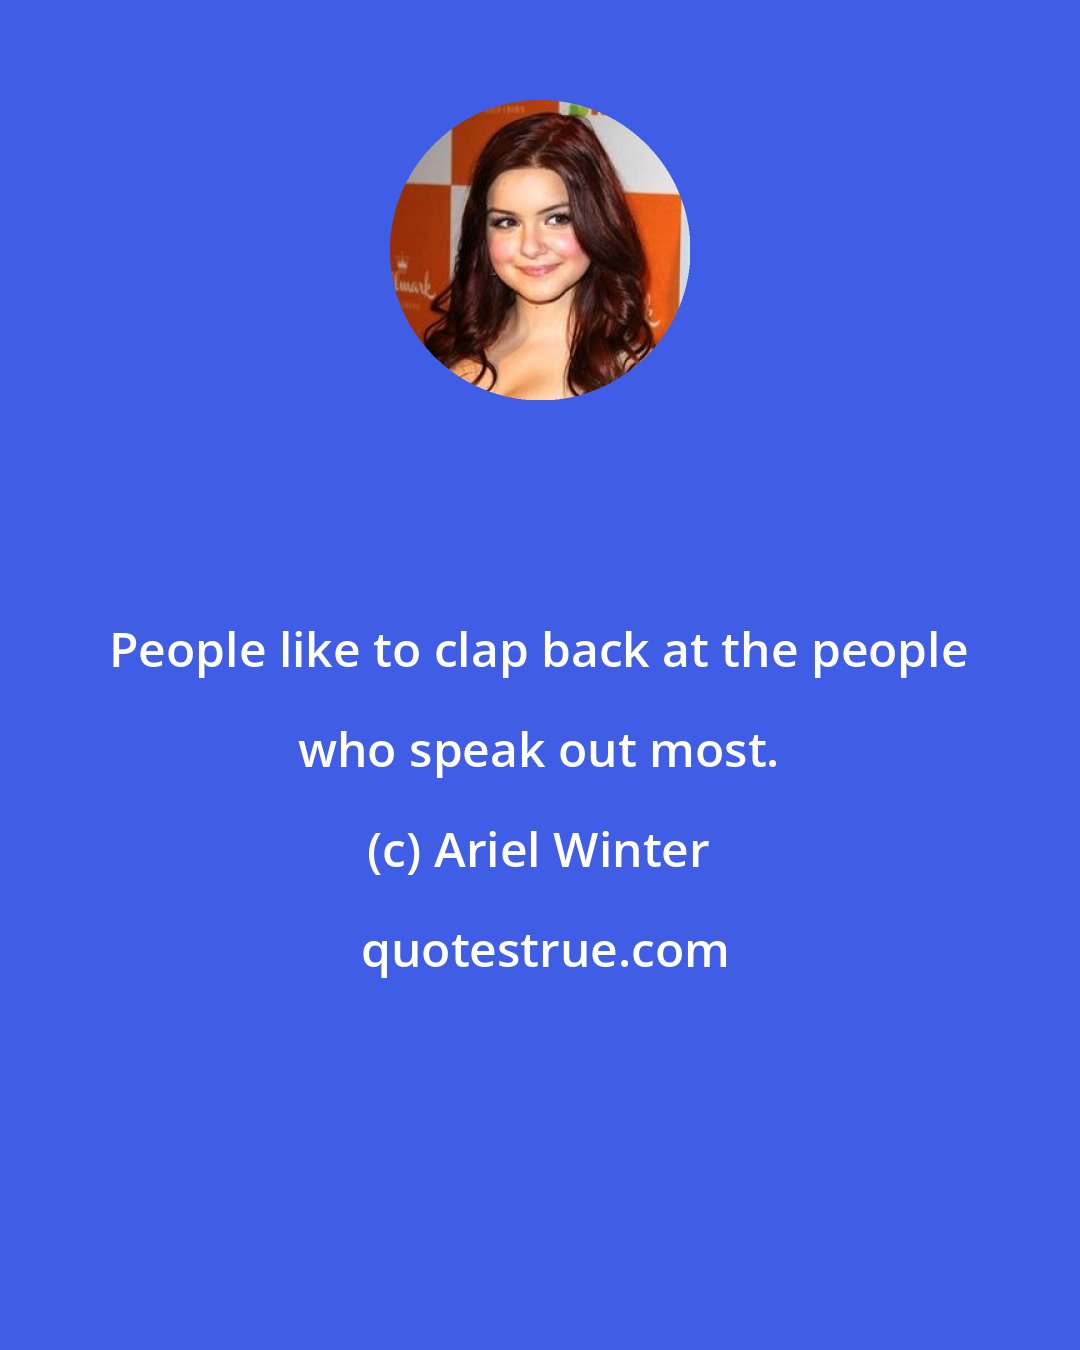 Ariel Winter: People like to clap back at the people who speak out most.